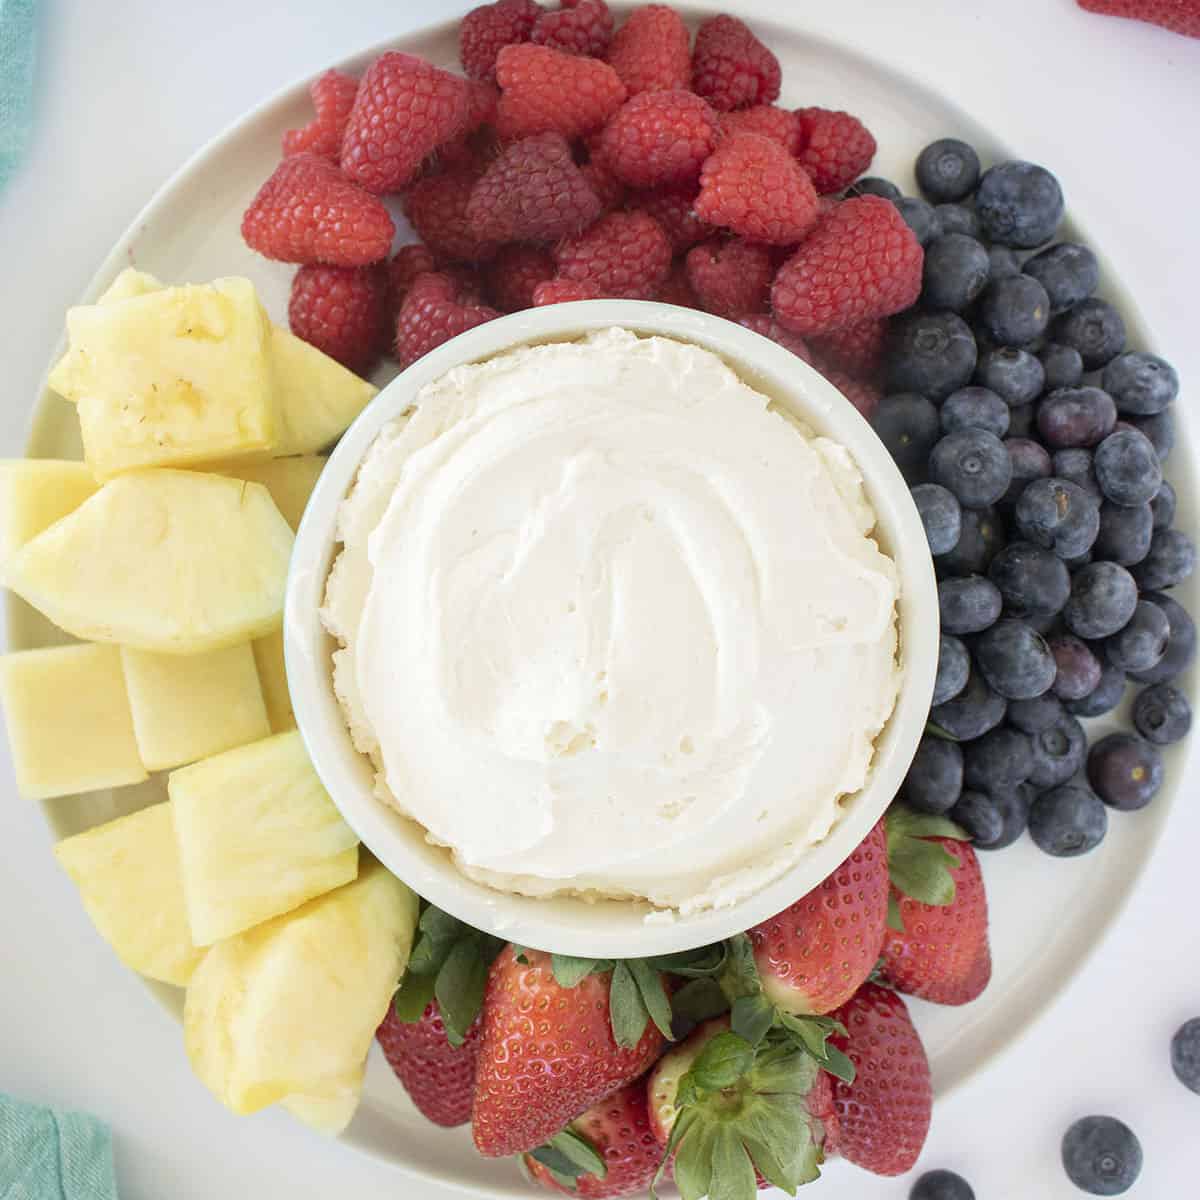 Cool Whip Fruit Dip on a platter with fresh fruit.